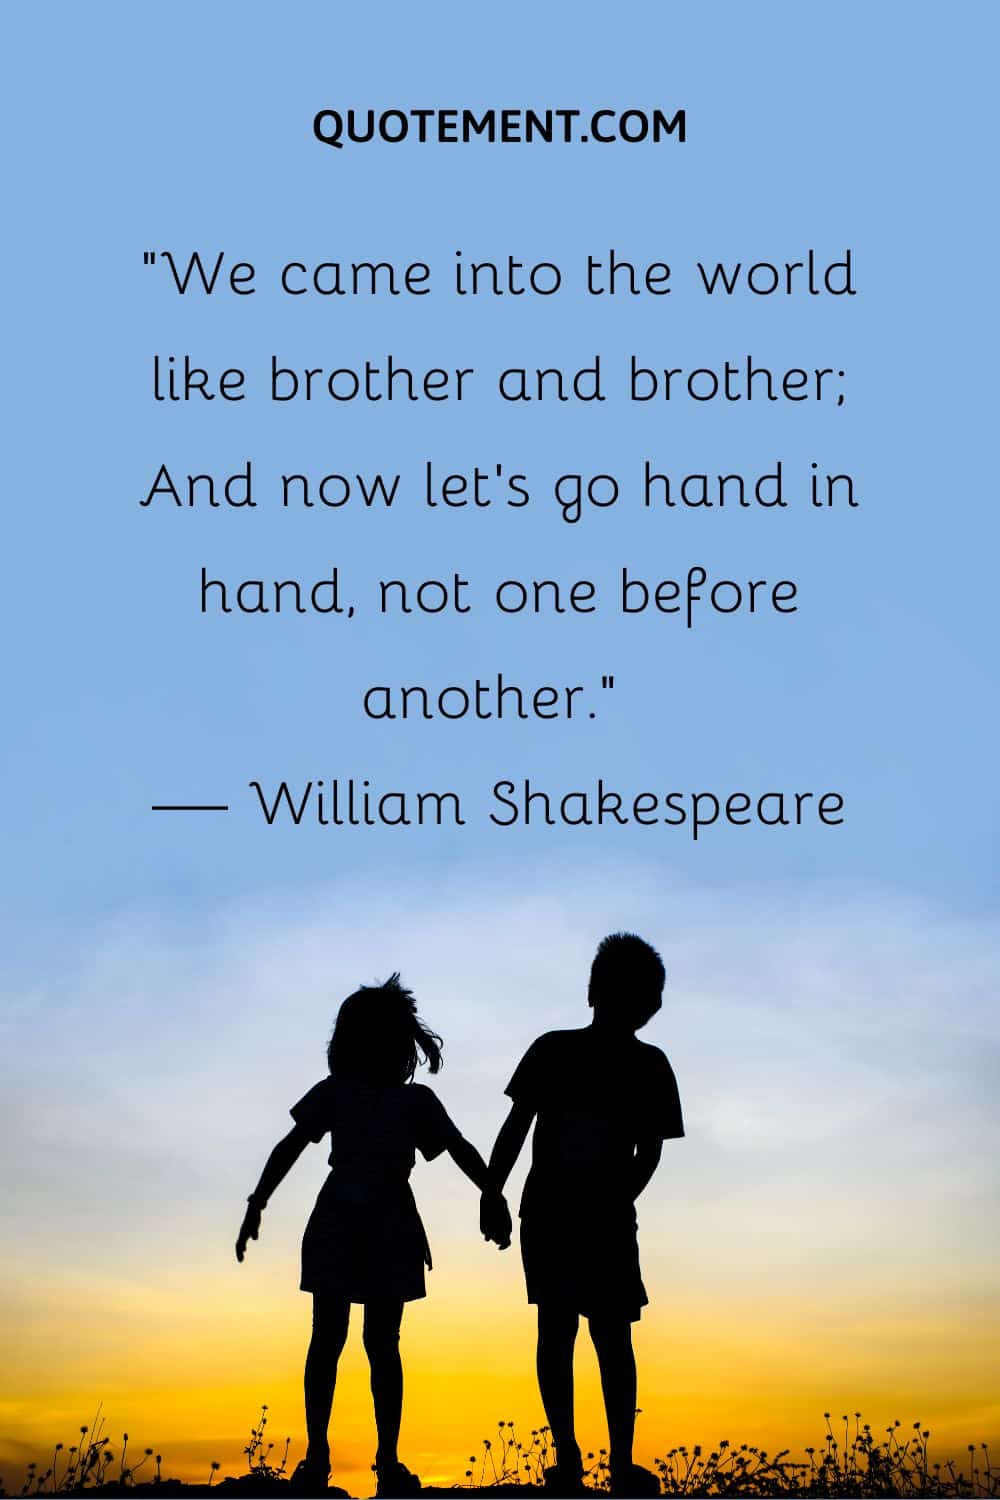 “We came into the world like brother and brother; And now let's go hand in hand, not one before another.” — William Shakespeare